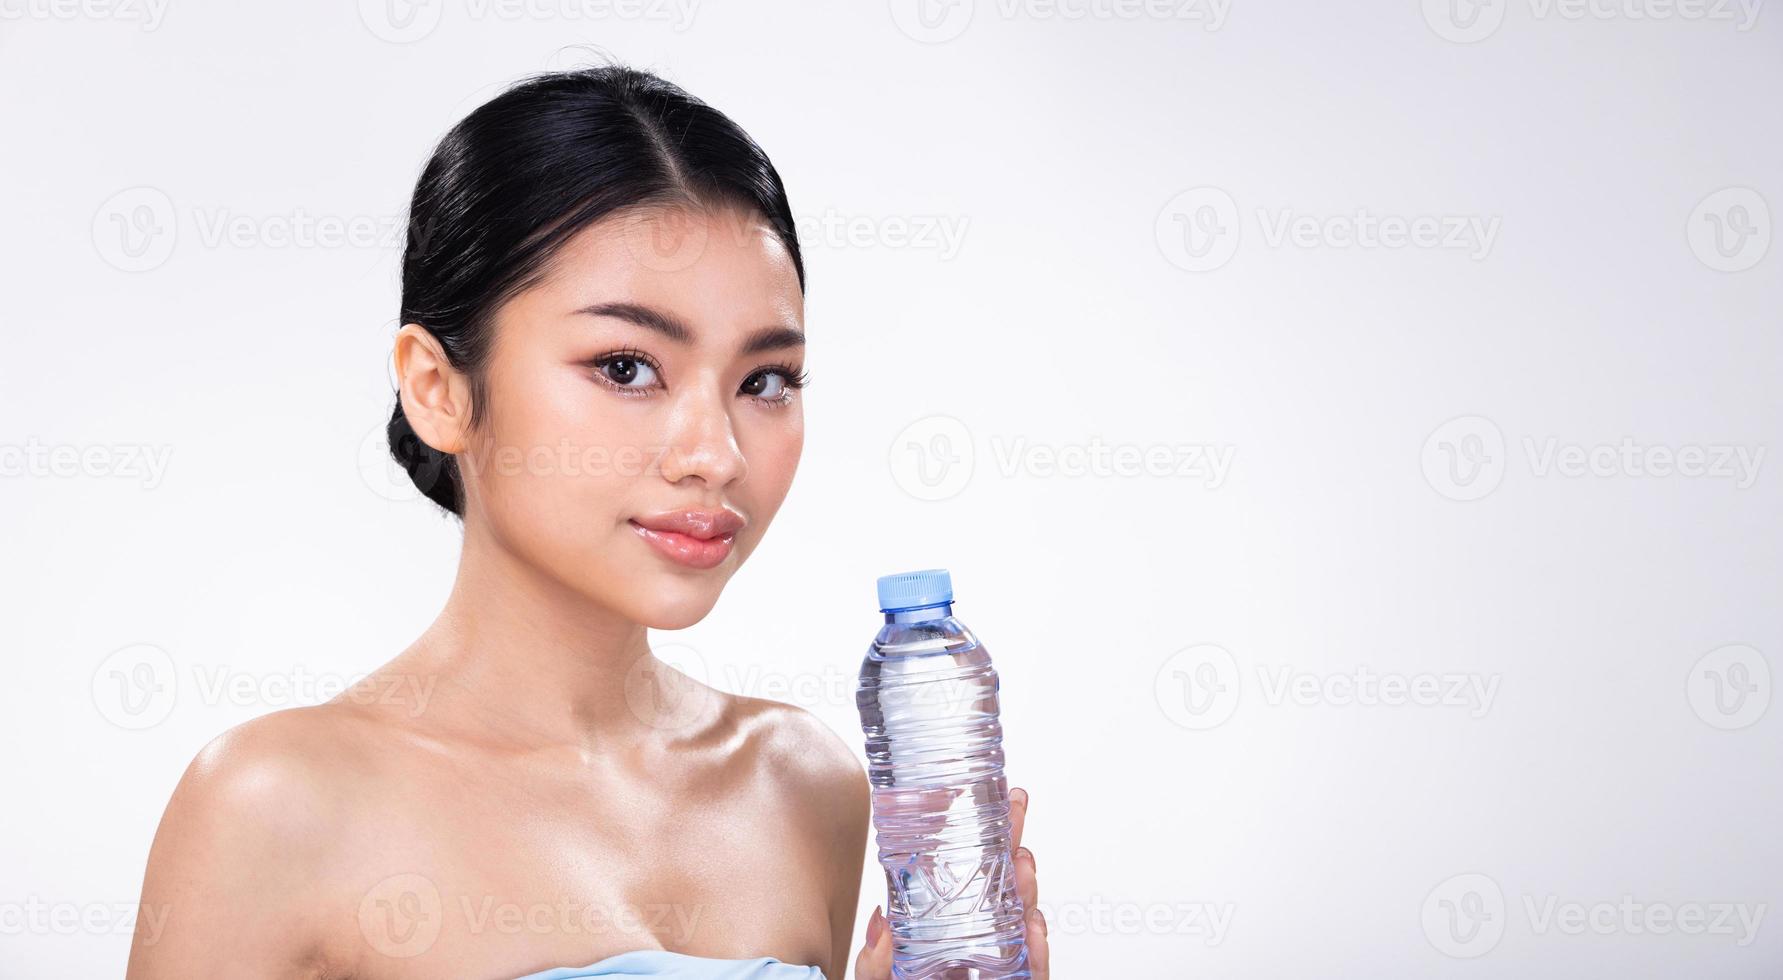 https://static.vecteezy.com/system/resources/previews/011/003/998/non_2x/portrait-face-shot-of-young-asian-20s-beautiful-woman-open-shoulder-look-at-camera-photo.jpg